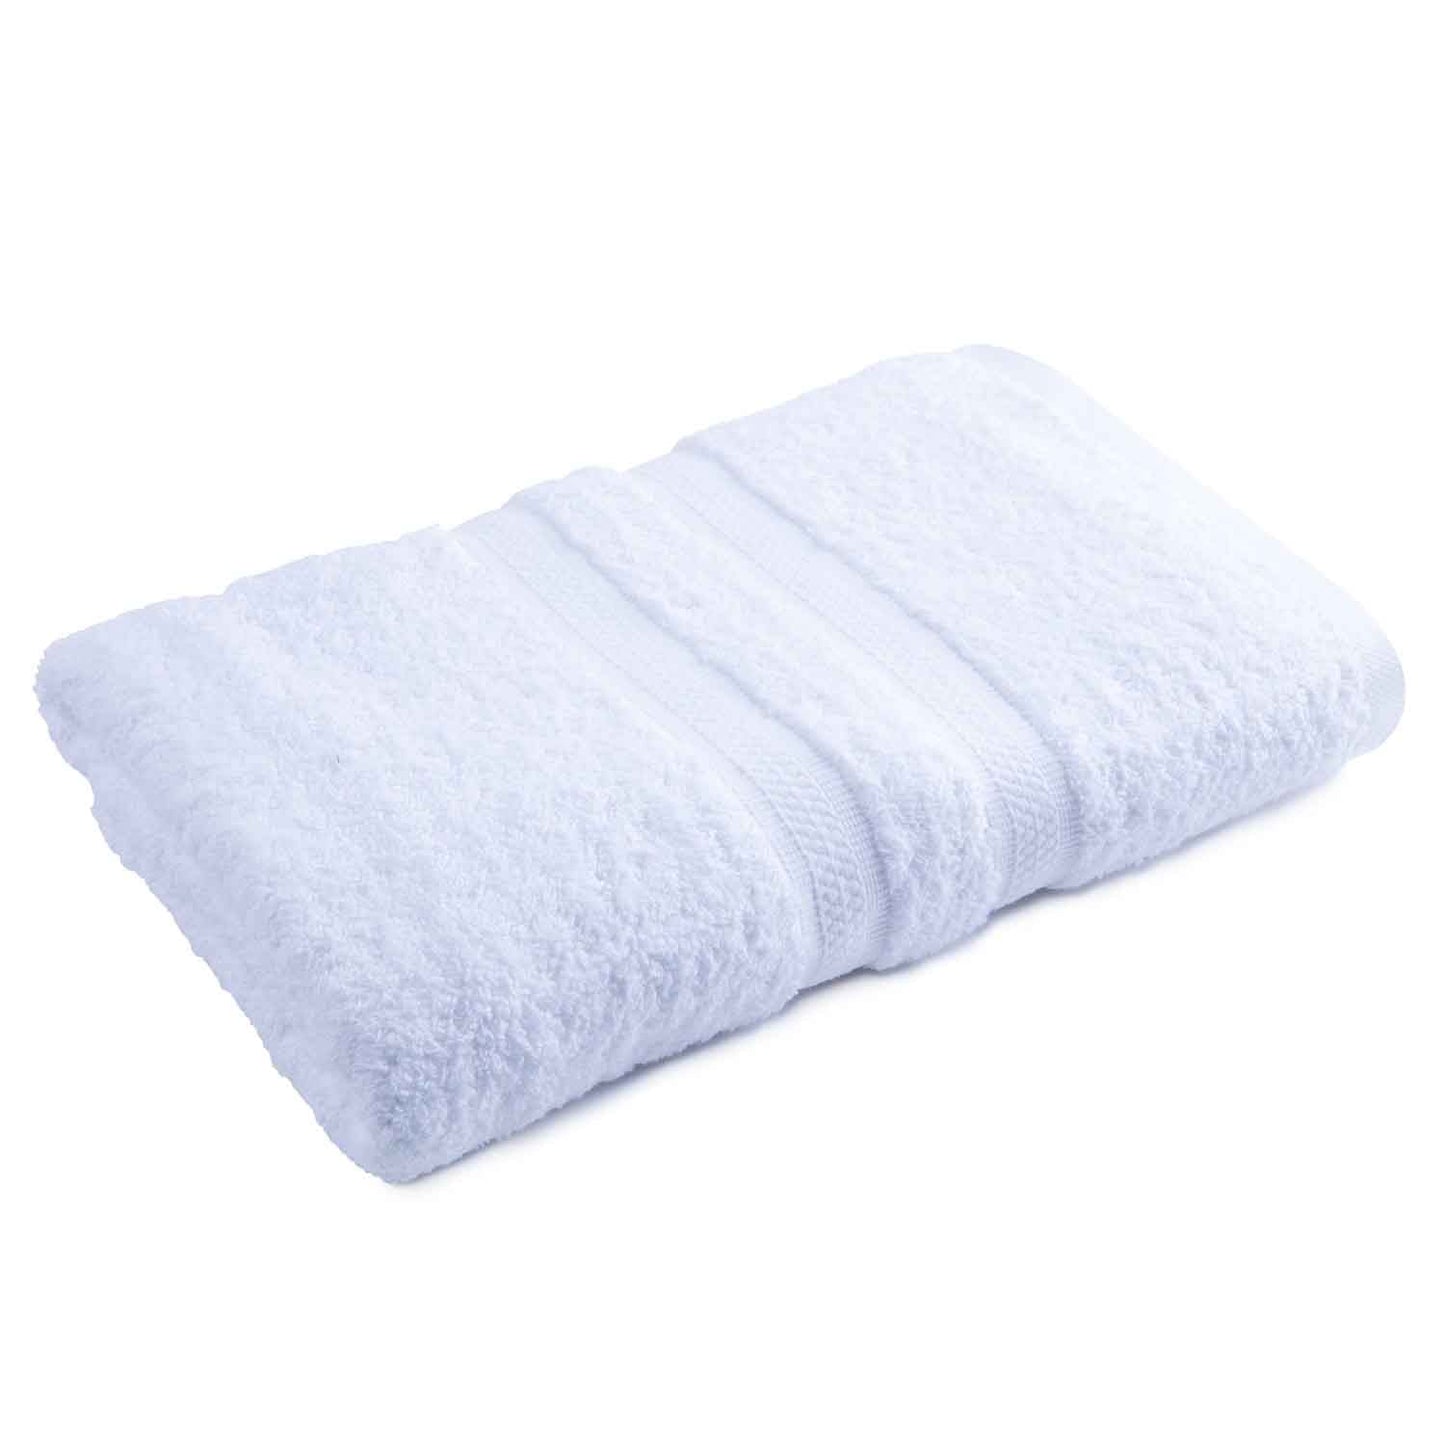 American Dawn | 27X54 Inch Kingston White Hotel Towel | Bath Towel With Double Dobby | Tailored Honeycomb With Accents 